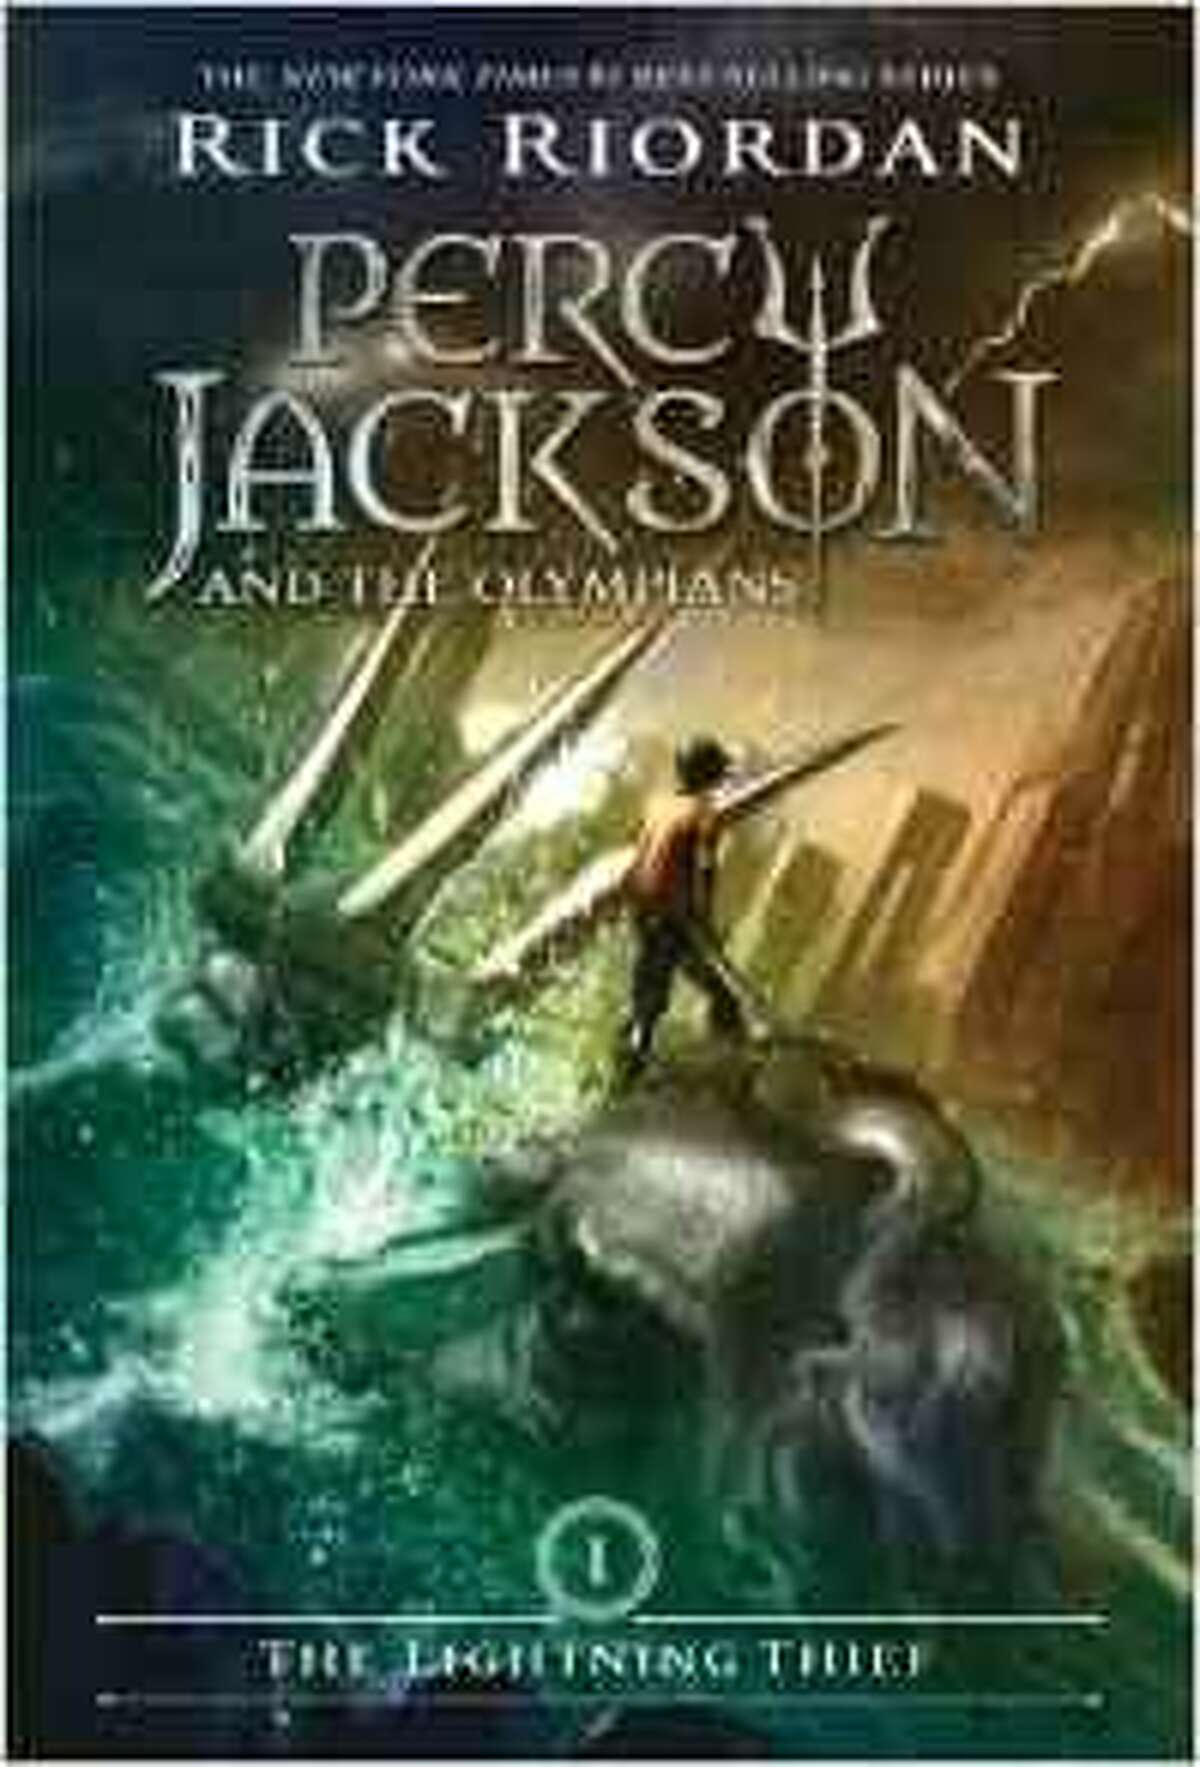 Rick Riordan is the author of the “Percy Jackson” series of books.